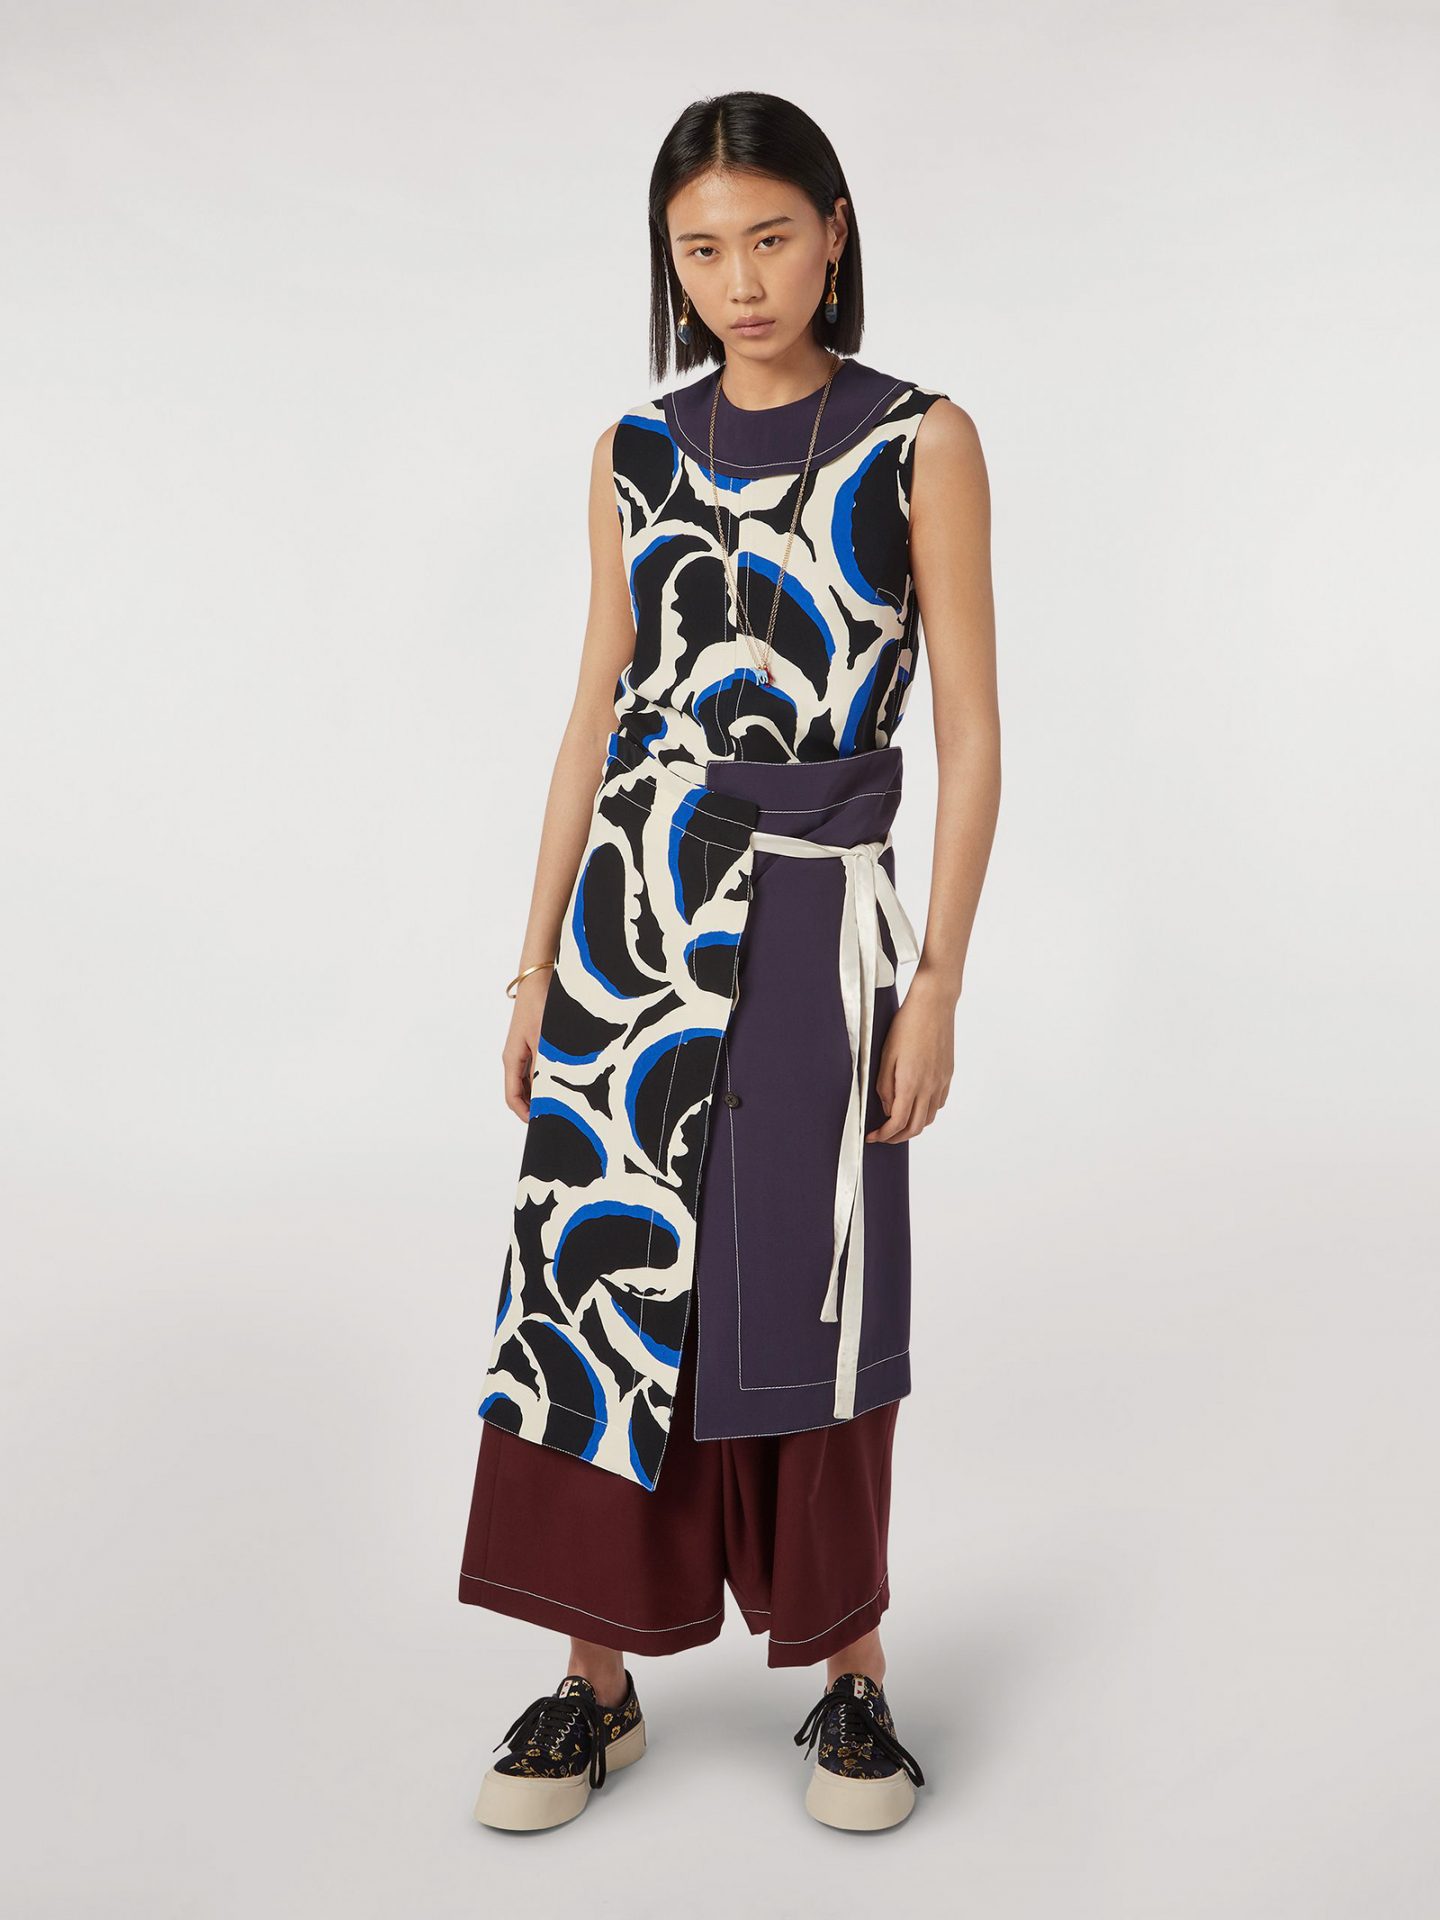 Marni Pre-Fall 2019 For Lookbook Friday – ALLIE NYC